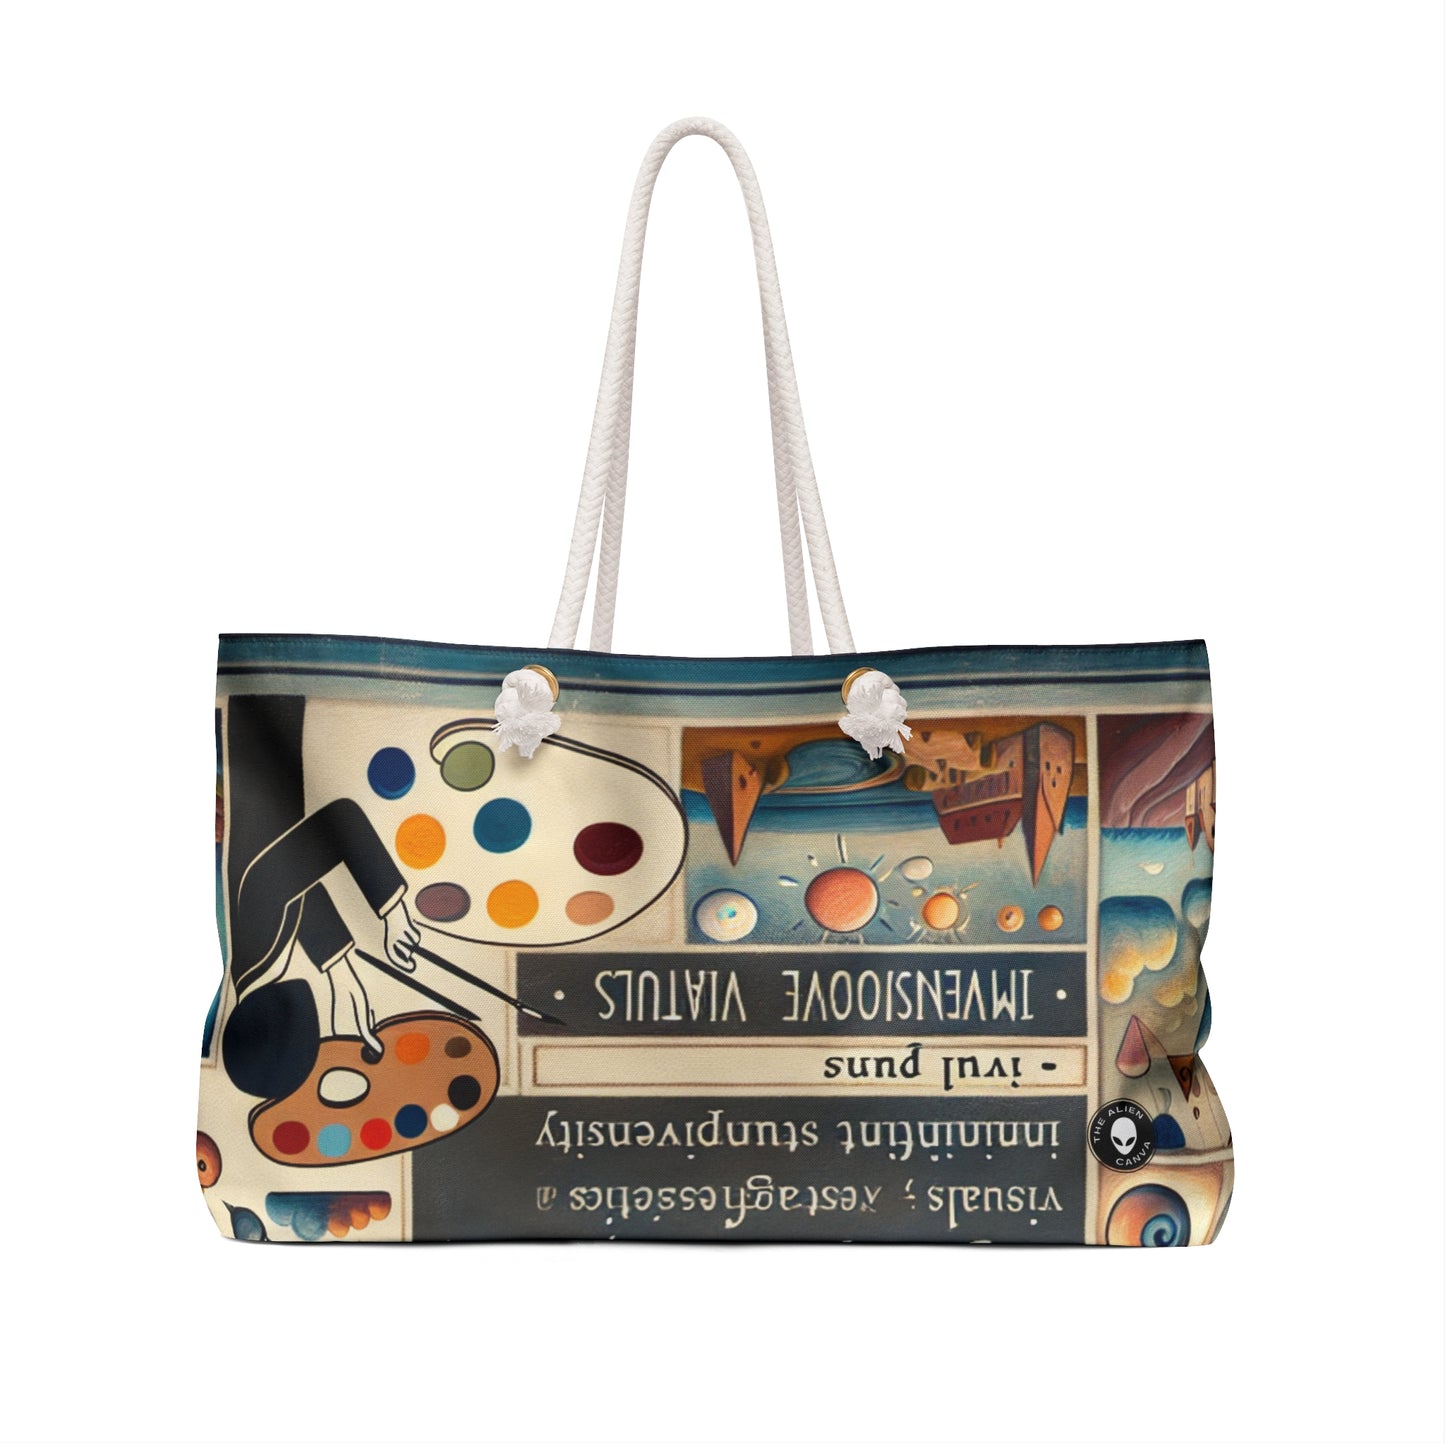 "Magical Tea Time: The Whimsical Transformation of a Teapot" - The Alien Weekender Bag Naïve Surrealism